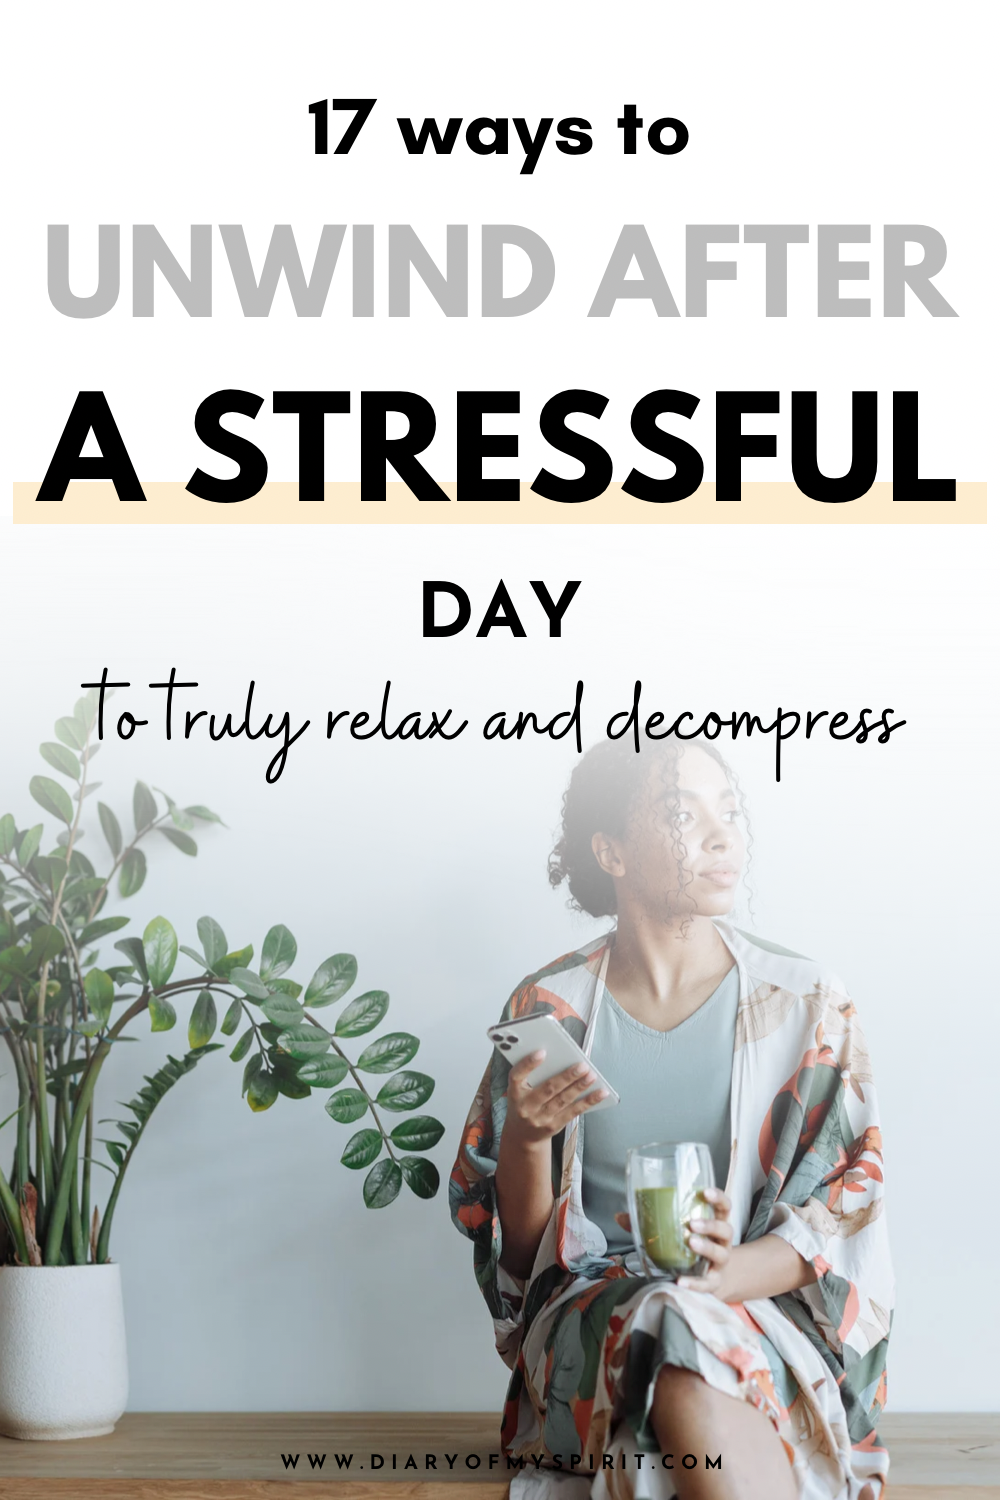 relax after a long, hard, stressful day at work or at home. Ways to unwind and decompress after a busy day and relieve stress.